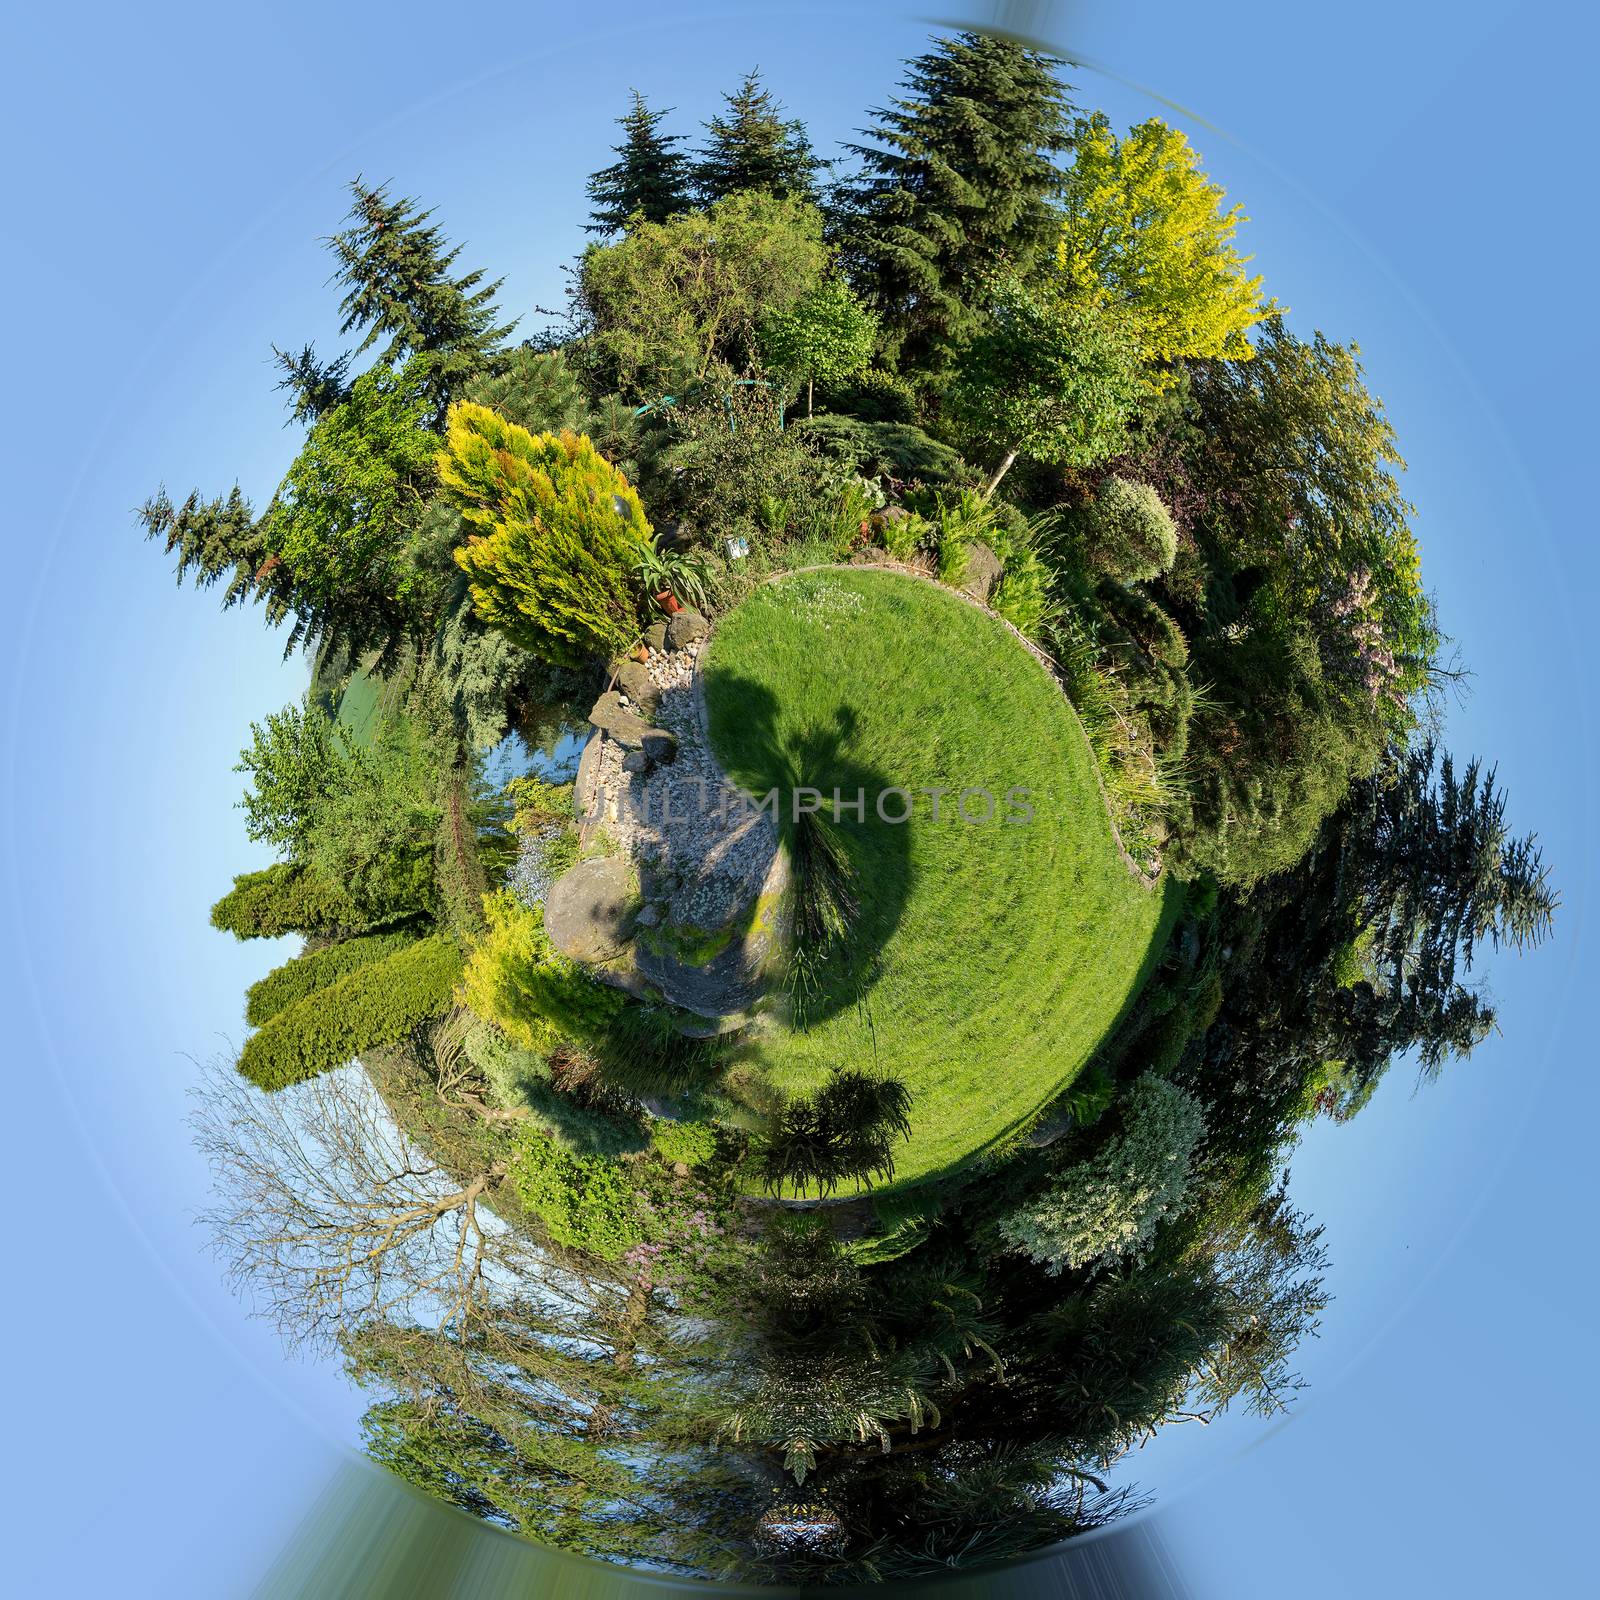 mini planet of Beautiful spring garden design, with conifer trees, green grass. Beautiful Little planet with spring garden, ecology concept. Tiny green planet with trees